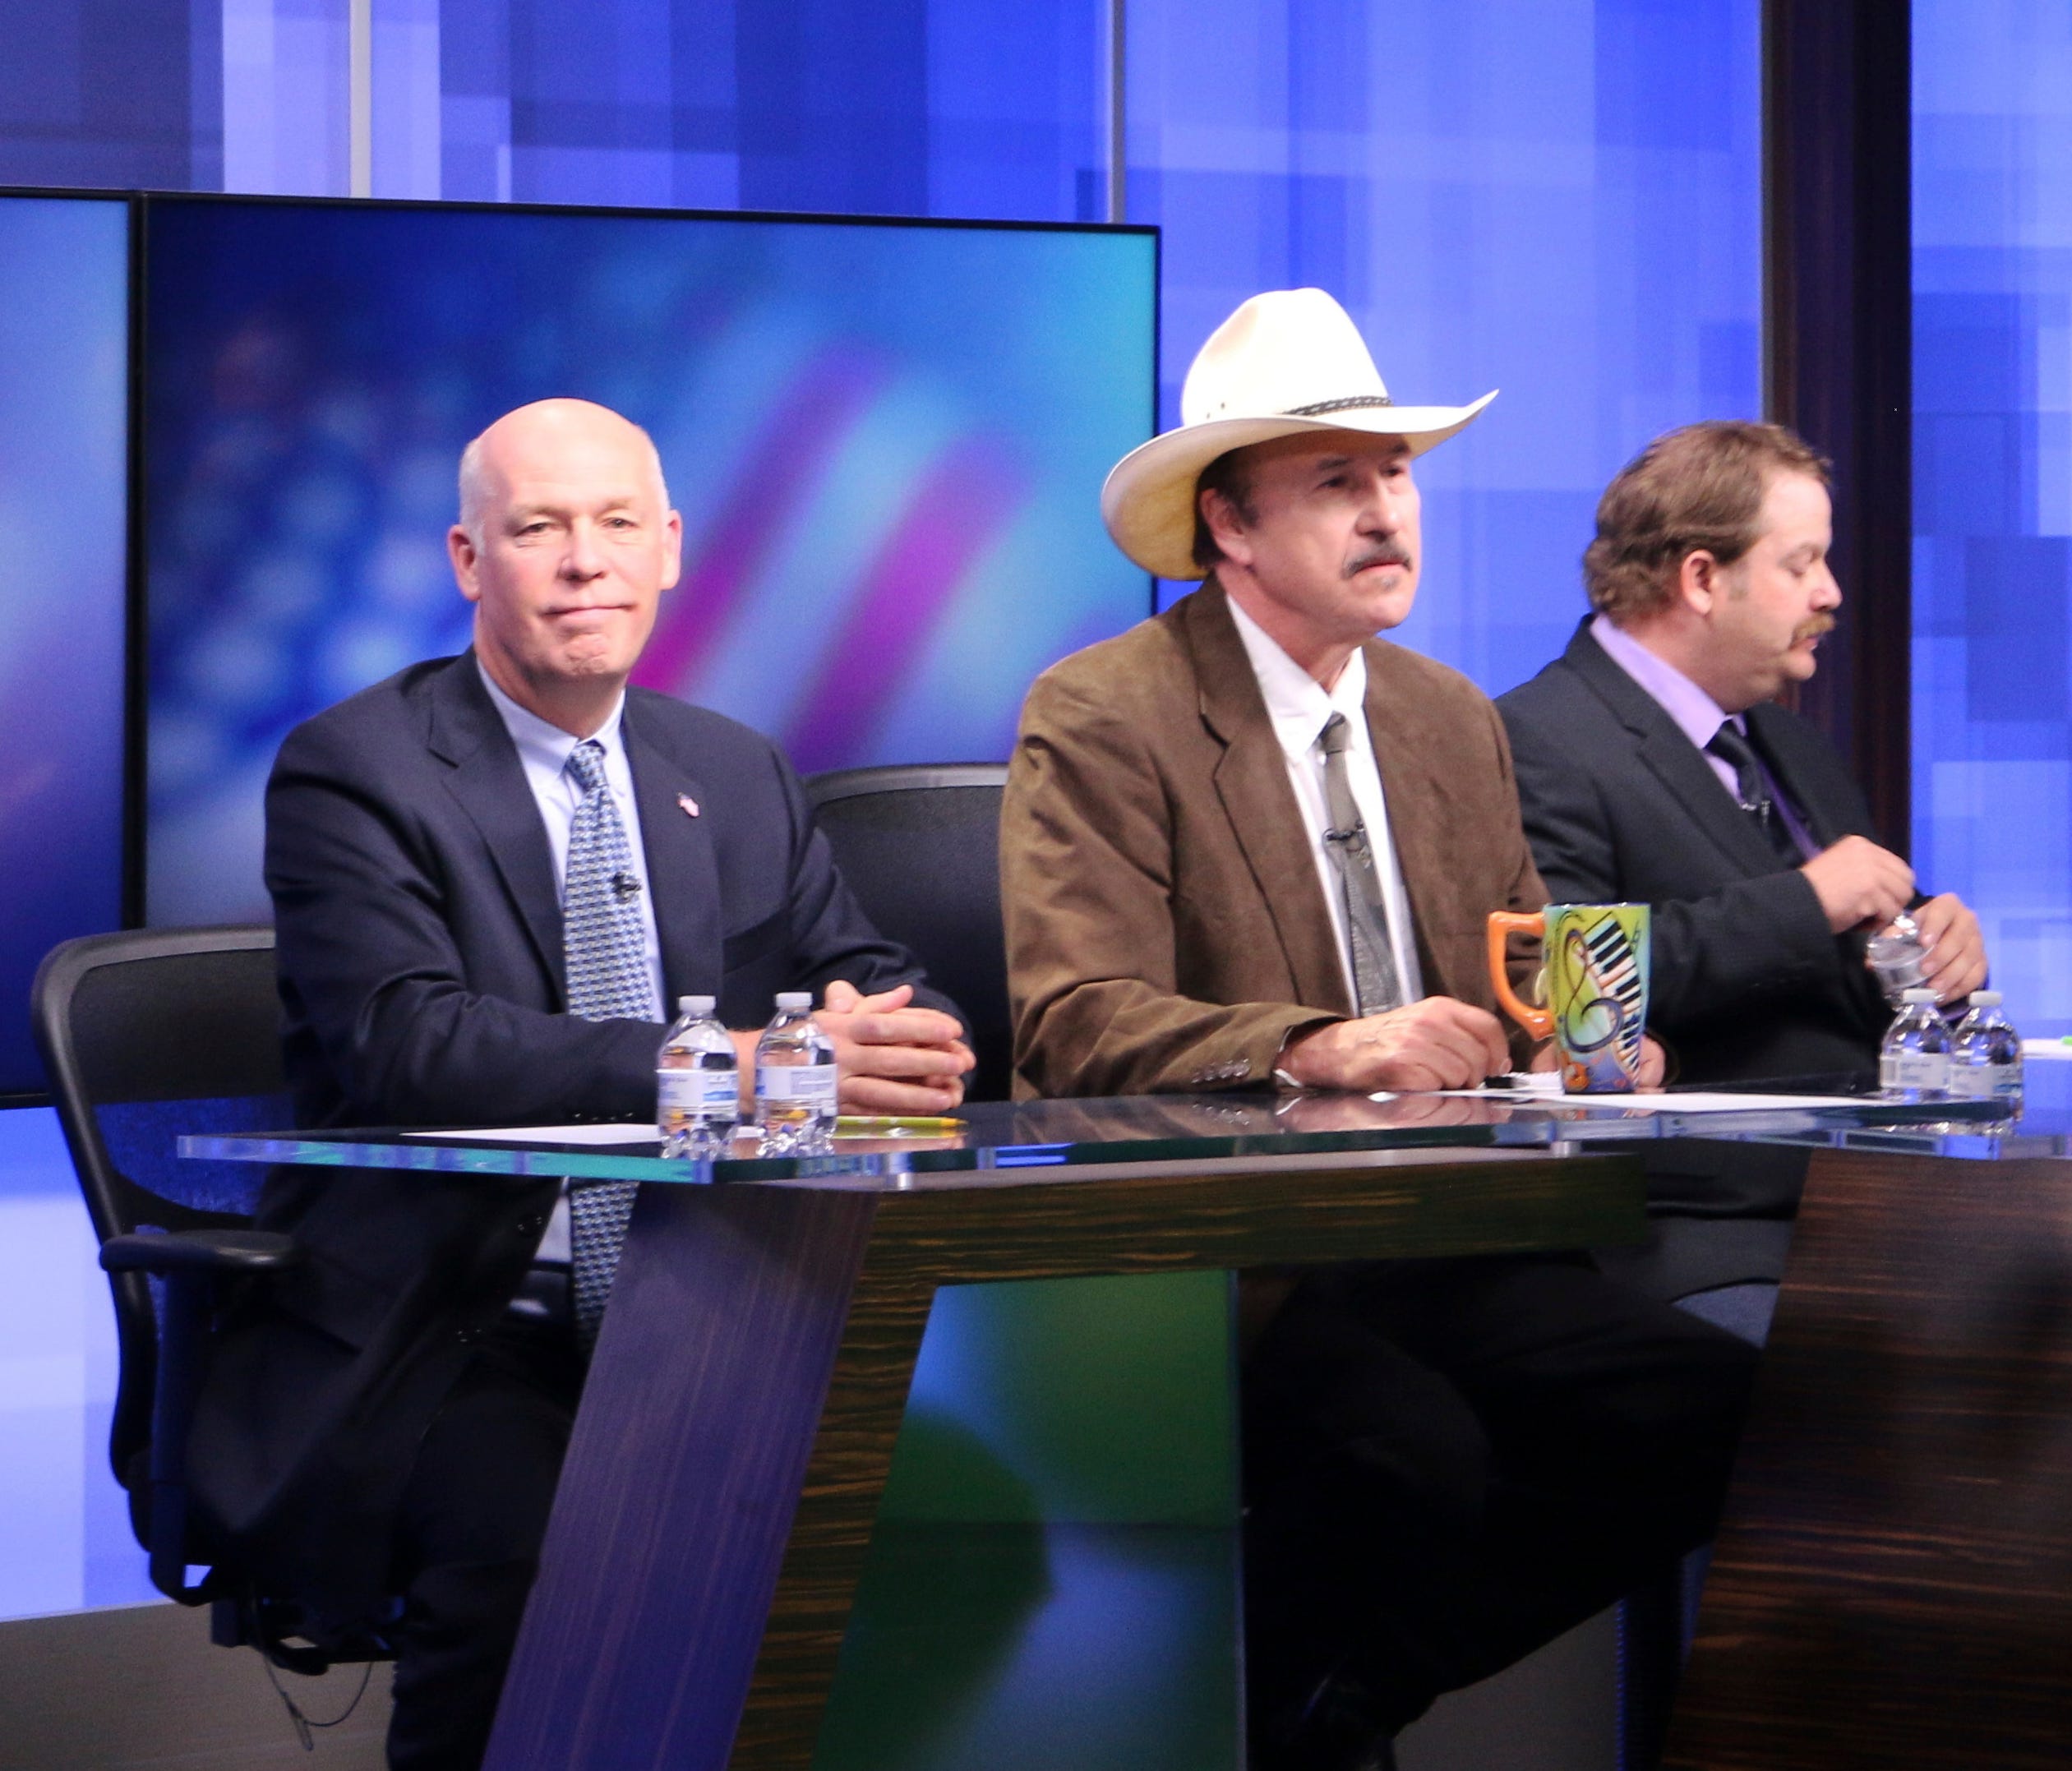 The three candidates, Republican Greg Gianforte, from left, Democrat Rob Quist and Libertarian Mark Wicks vying to fill Montana's only congressional seat await the start of the only televised debate ahead of the May 25 special election, on April 29, 